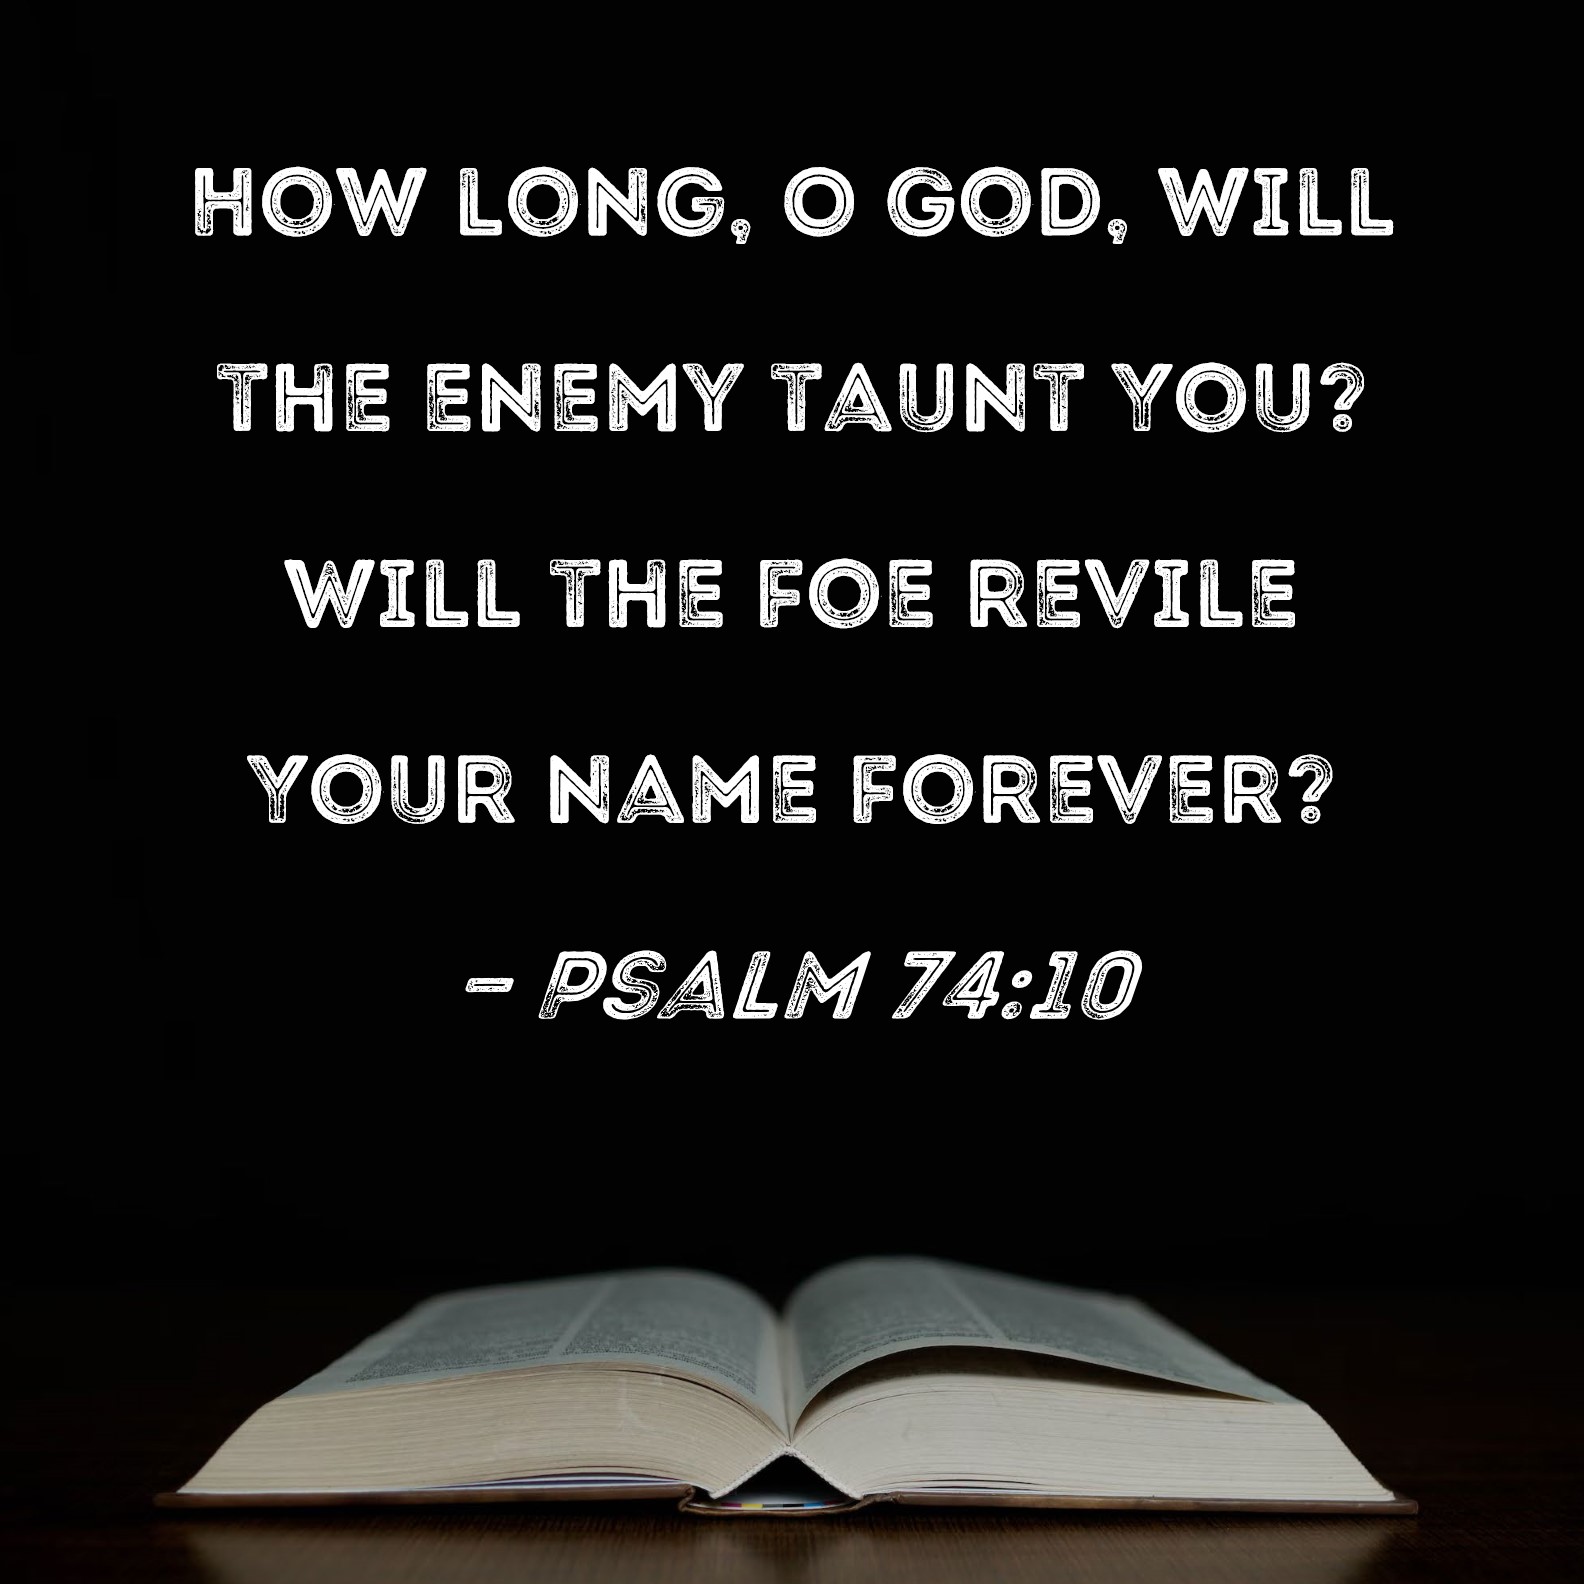 psalm-74-10-how-long-o-god-will-the-enemy-taunt-you-will-the-foe